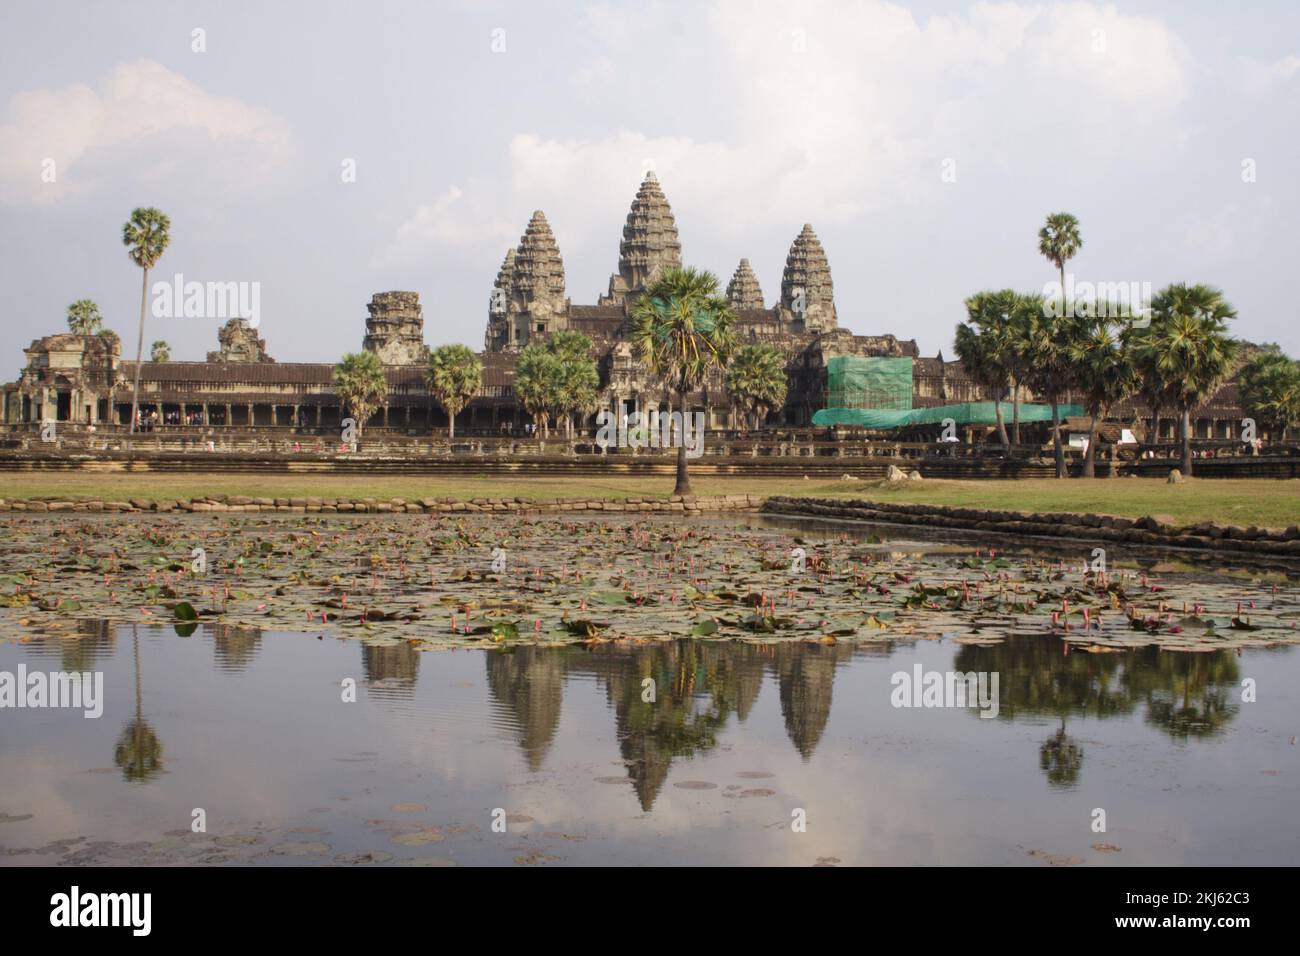 Angkor Wat reflected in a pool with water lilies, Angkor, Siem Reap, Cambodia Stock Photo